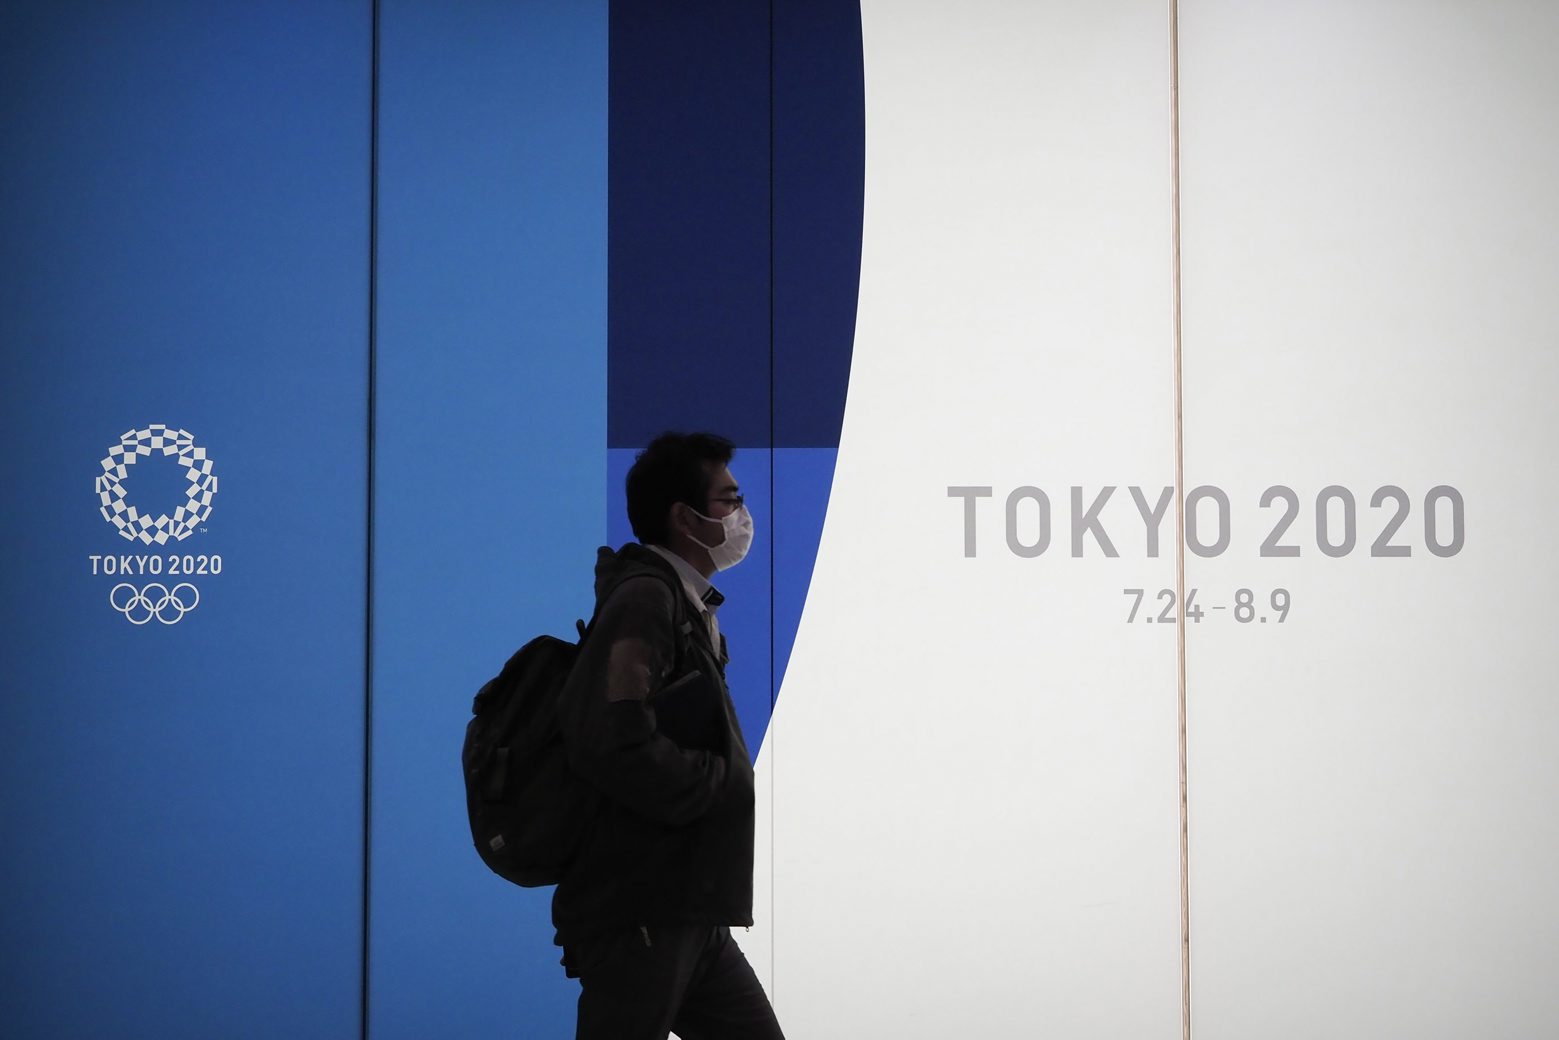 A man walks past a large display promoting the Tokyo 2020 Olympics in Tokyo, Friday, March 13, 2020. U.S. President Donald Trump's suggestion to postpone the Tokyo Olympics for a year because of the spreading coronavirus was immediately shot down by Japan's Olympic minister. For most people, the new coronavirus causes only mild or moderate symptoms. For some it can cause more severe illness. (AP Photo/Jae C. Hong) Virus Outbreak Japan